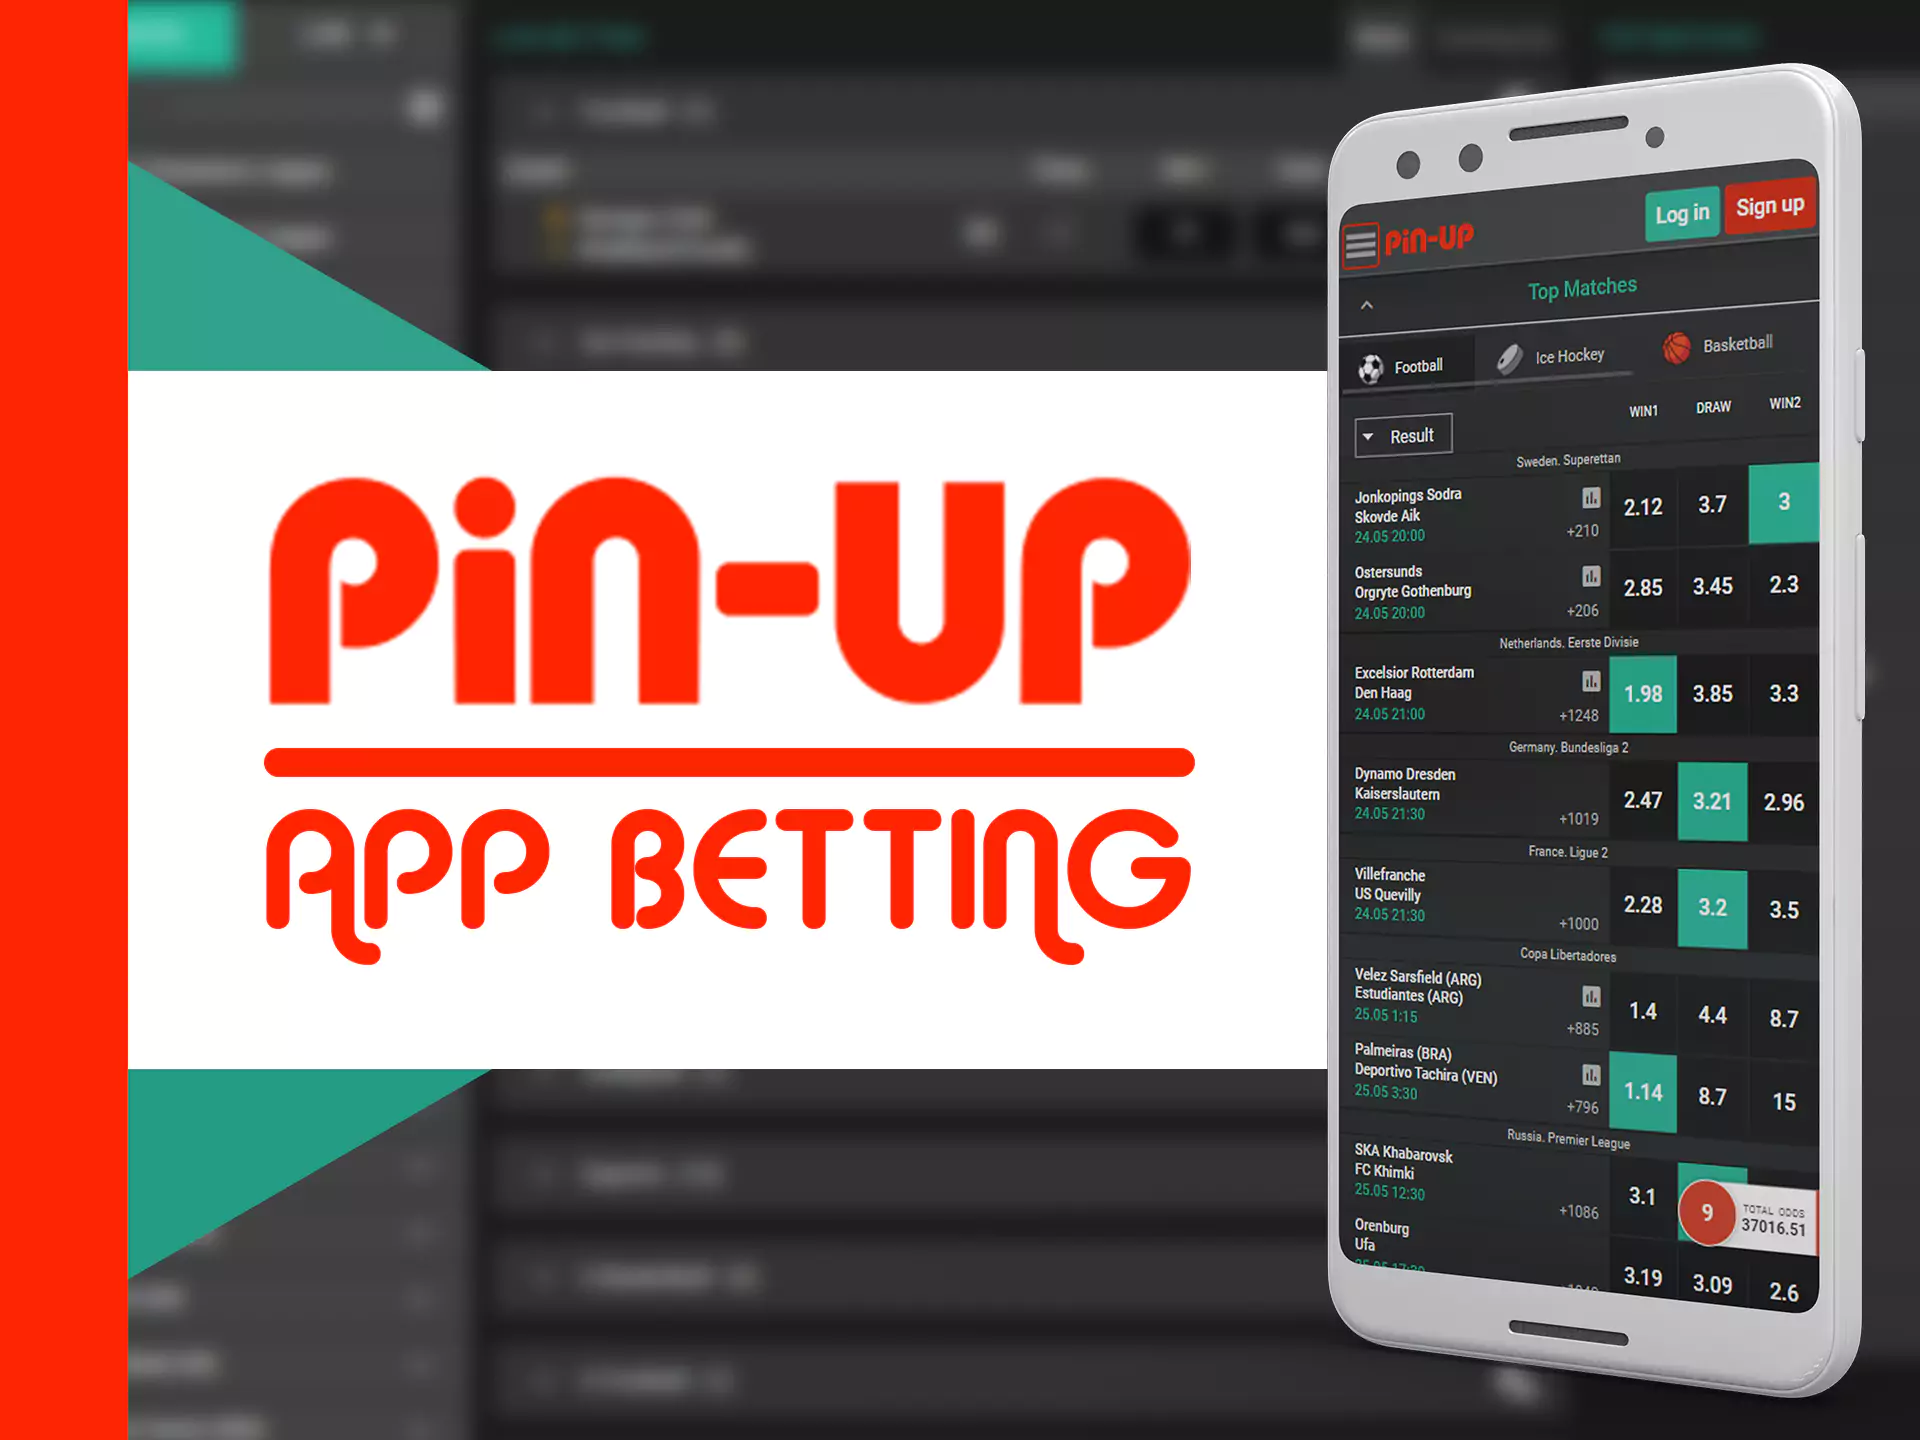 You can place prematch bets or during the match in the Pun-Up app.